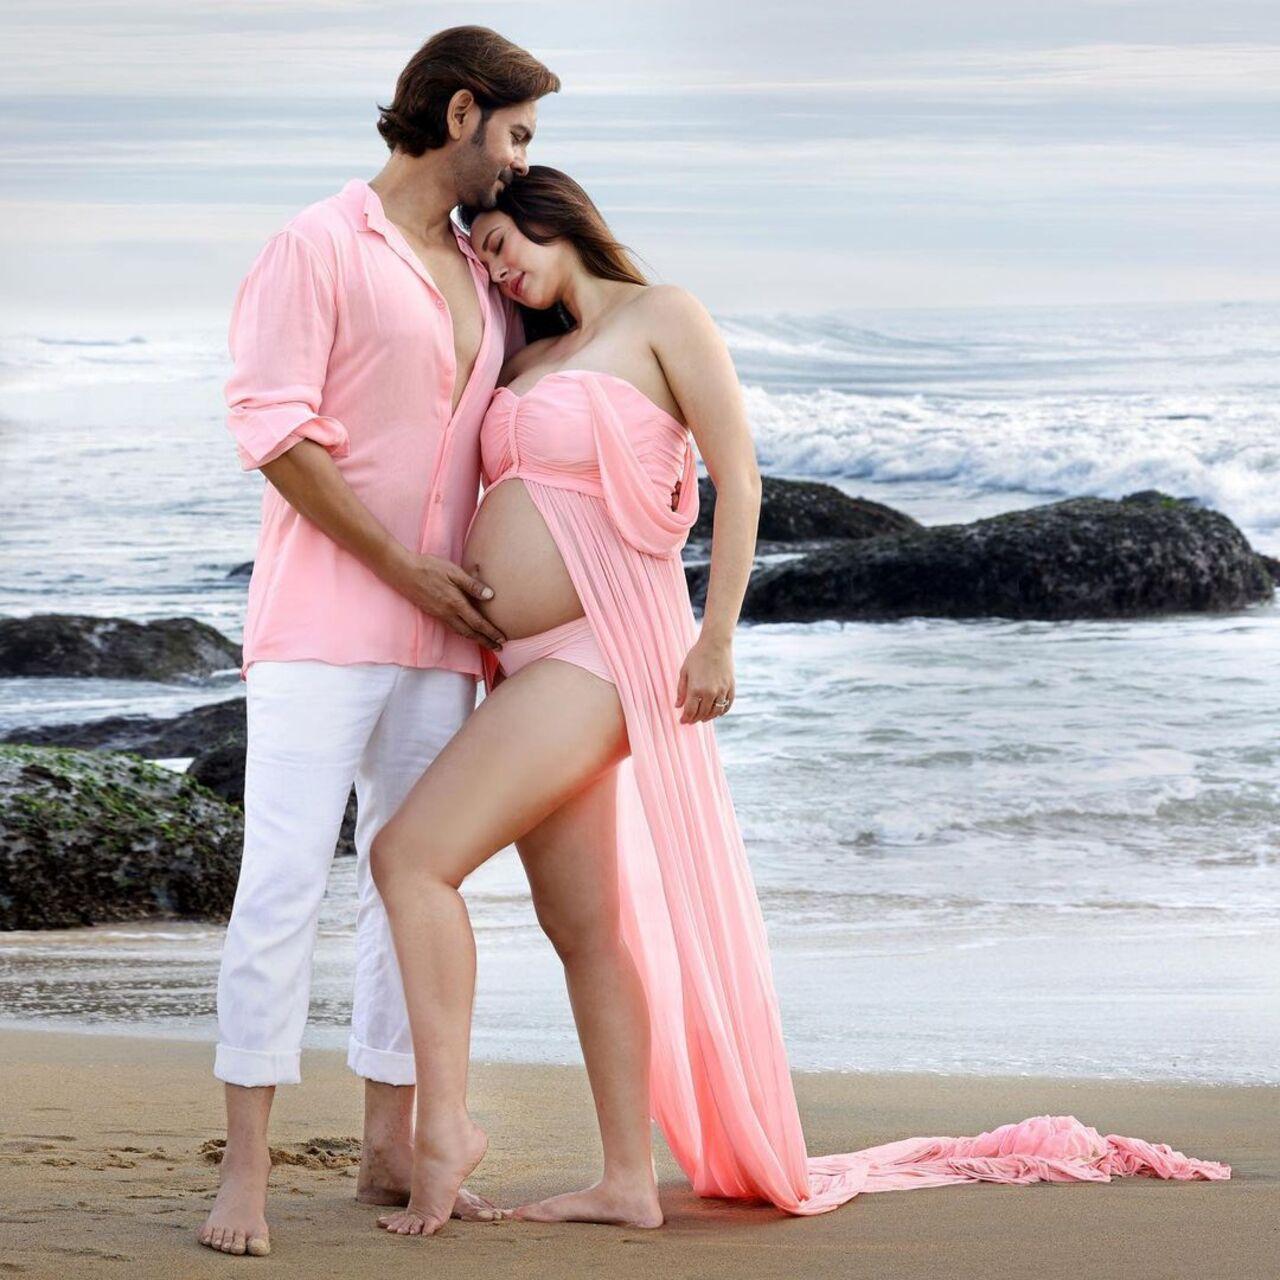 Rochelle Rao and Keith Sequeira announced their pregnancy on August 2 in a joint Instagram post